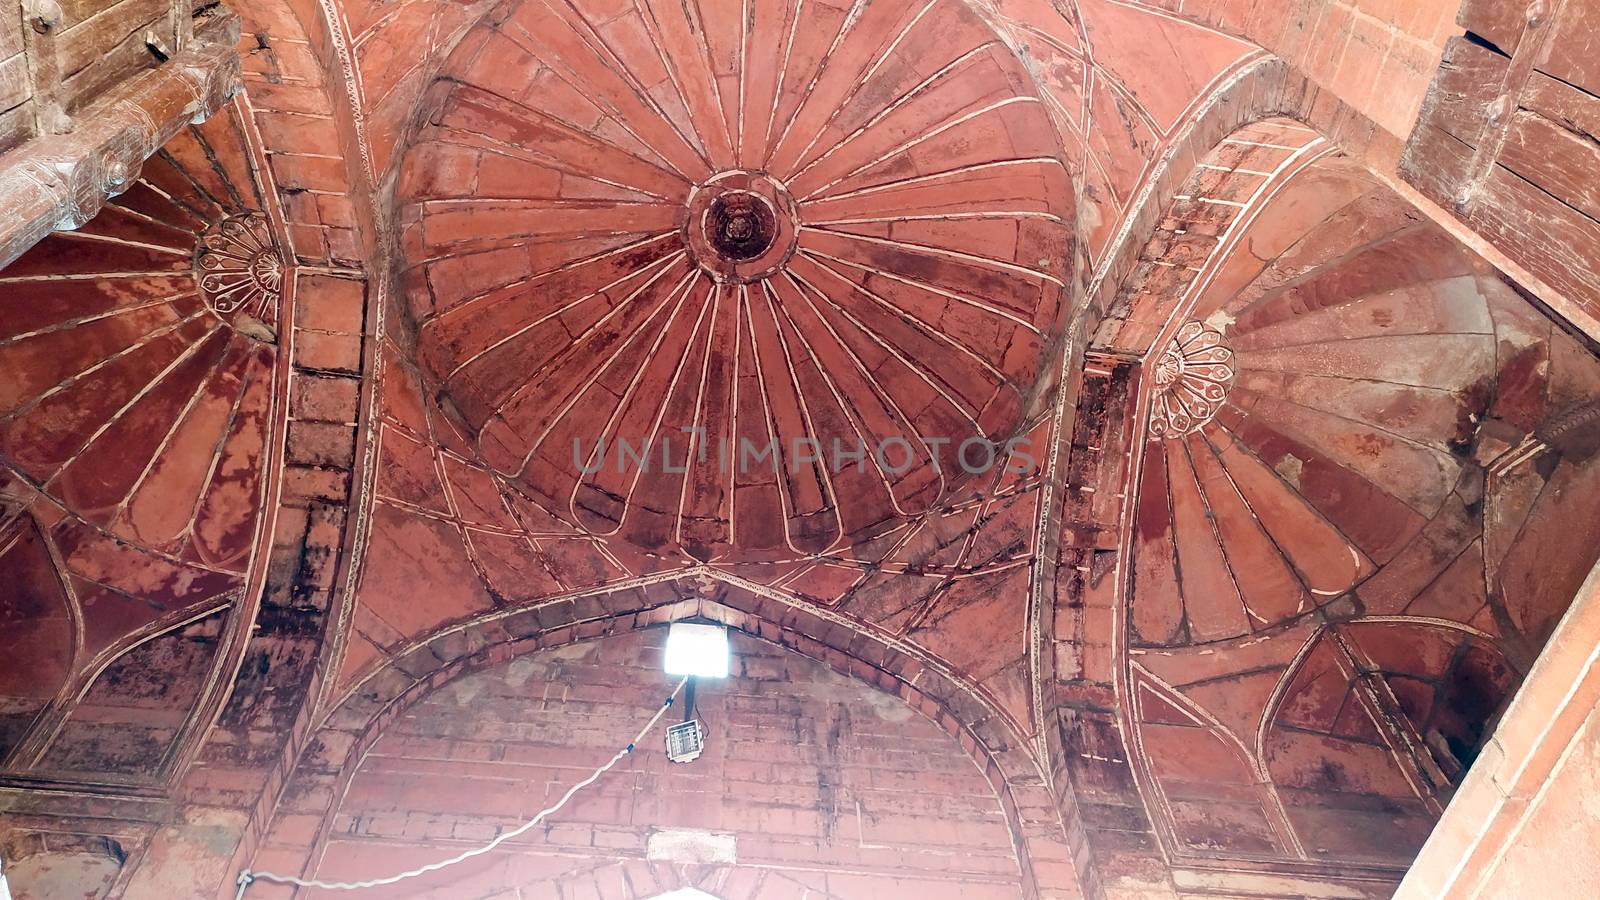 Archeological feature of Orchha Agra fort Jahangir Mahal a pink sandstone fortification Palace of moghuls emperor Mahal-e-Jahangir a citadel and garrison and unesco heritage site. Agra India May 2019